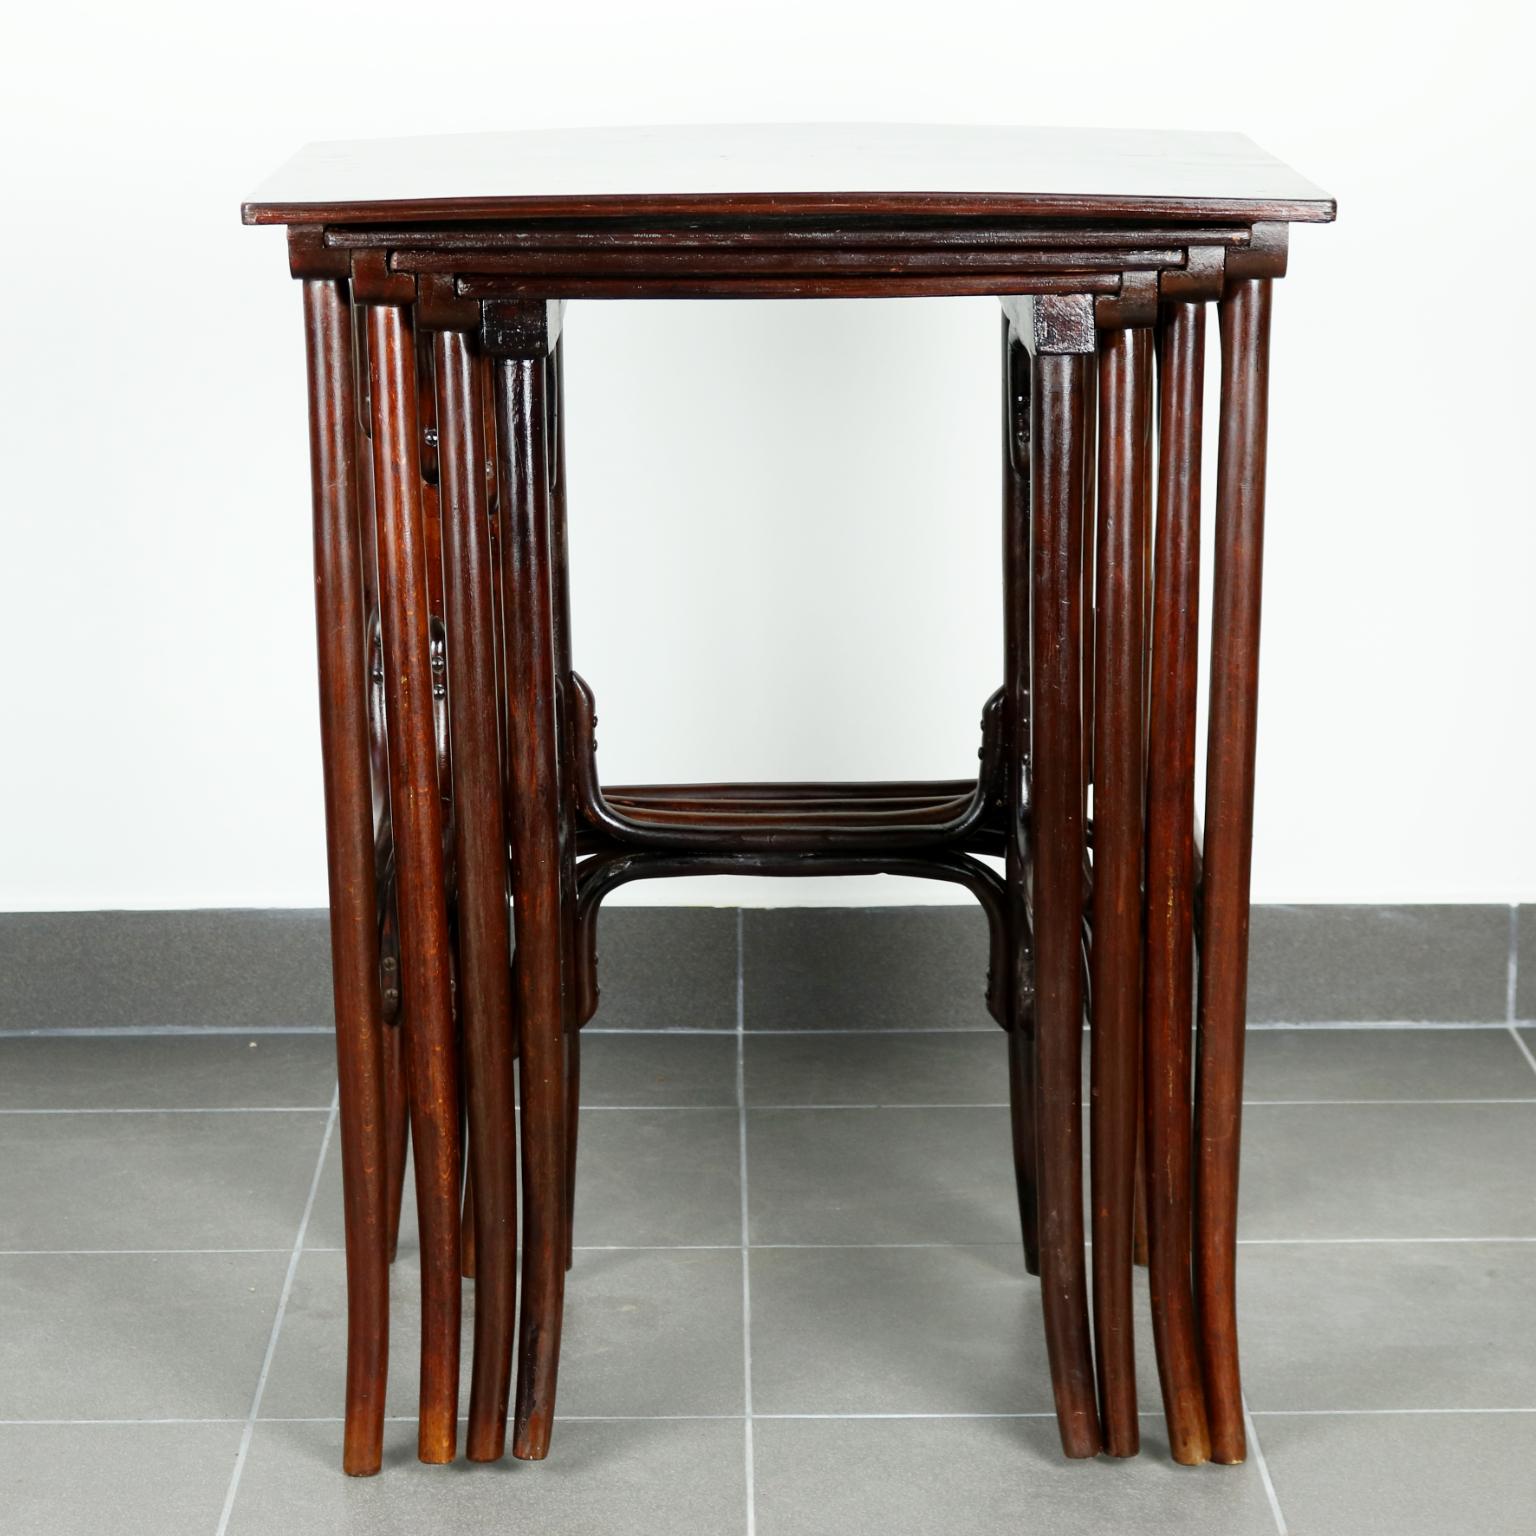 Early 20th Century Set of Four Pieces Nesting Tables No.10 by Thonet, circa 1900